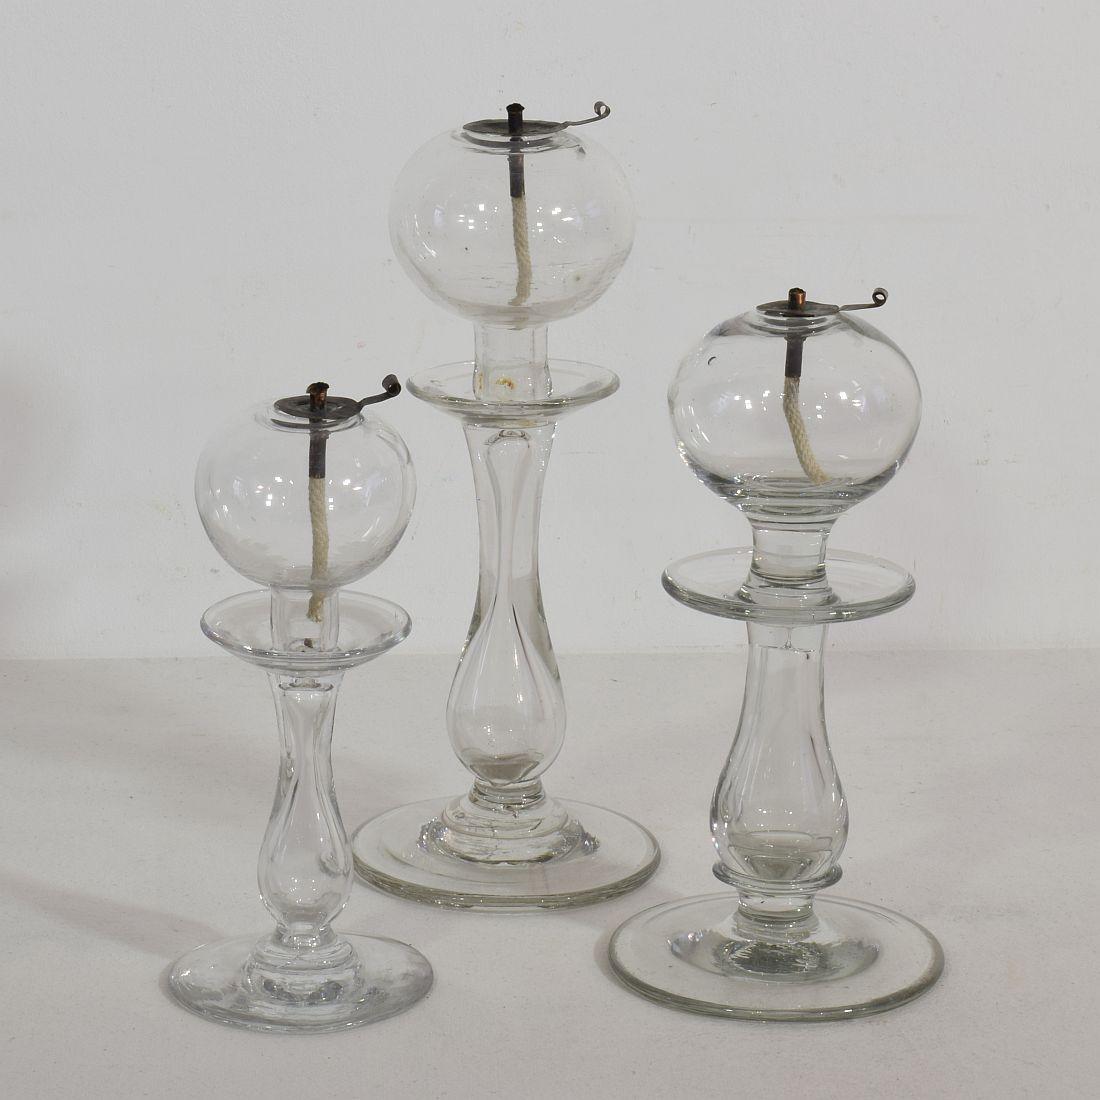 Rare collection of three hand blown glass weaver oil lamps from the South of France, France, circa 1800-1900
Very good condition.
Measures: H 19-25 cm, W 8-10.5 cm, D 8-10.5 cm each
Measurement here below is of the largest oil lamp.



